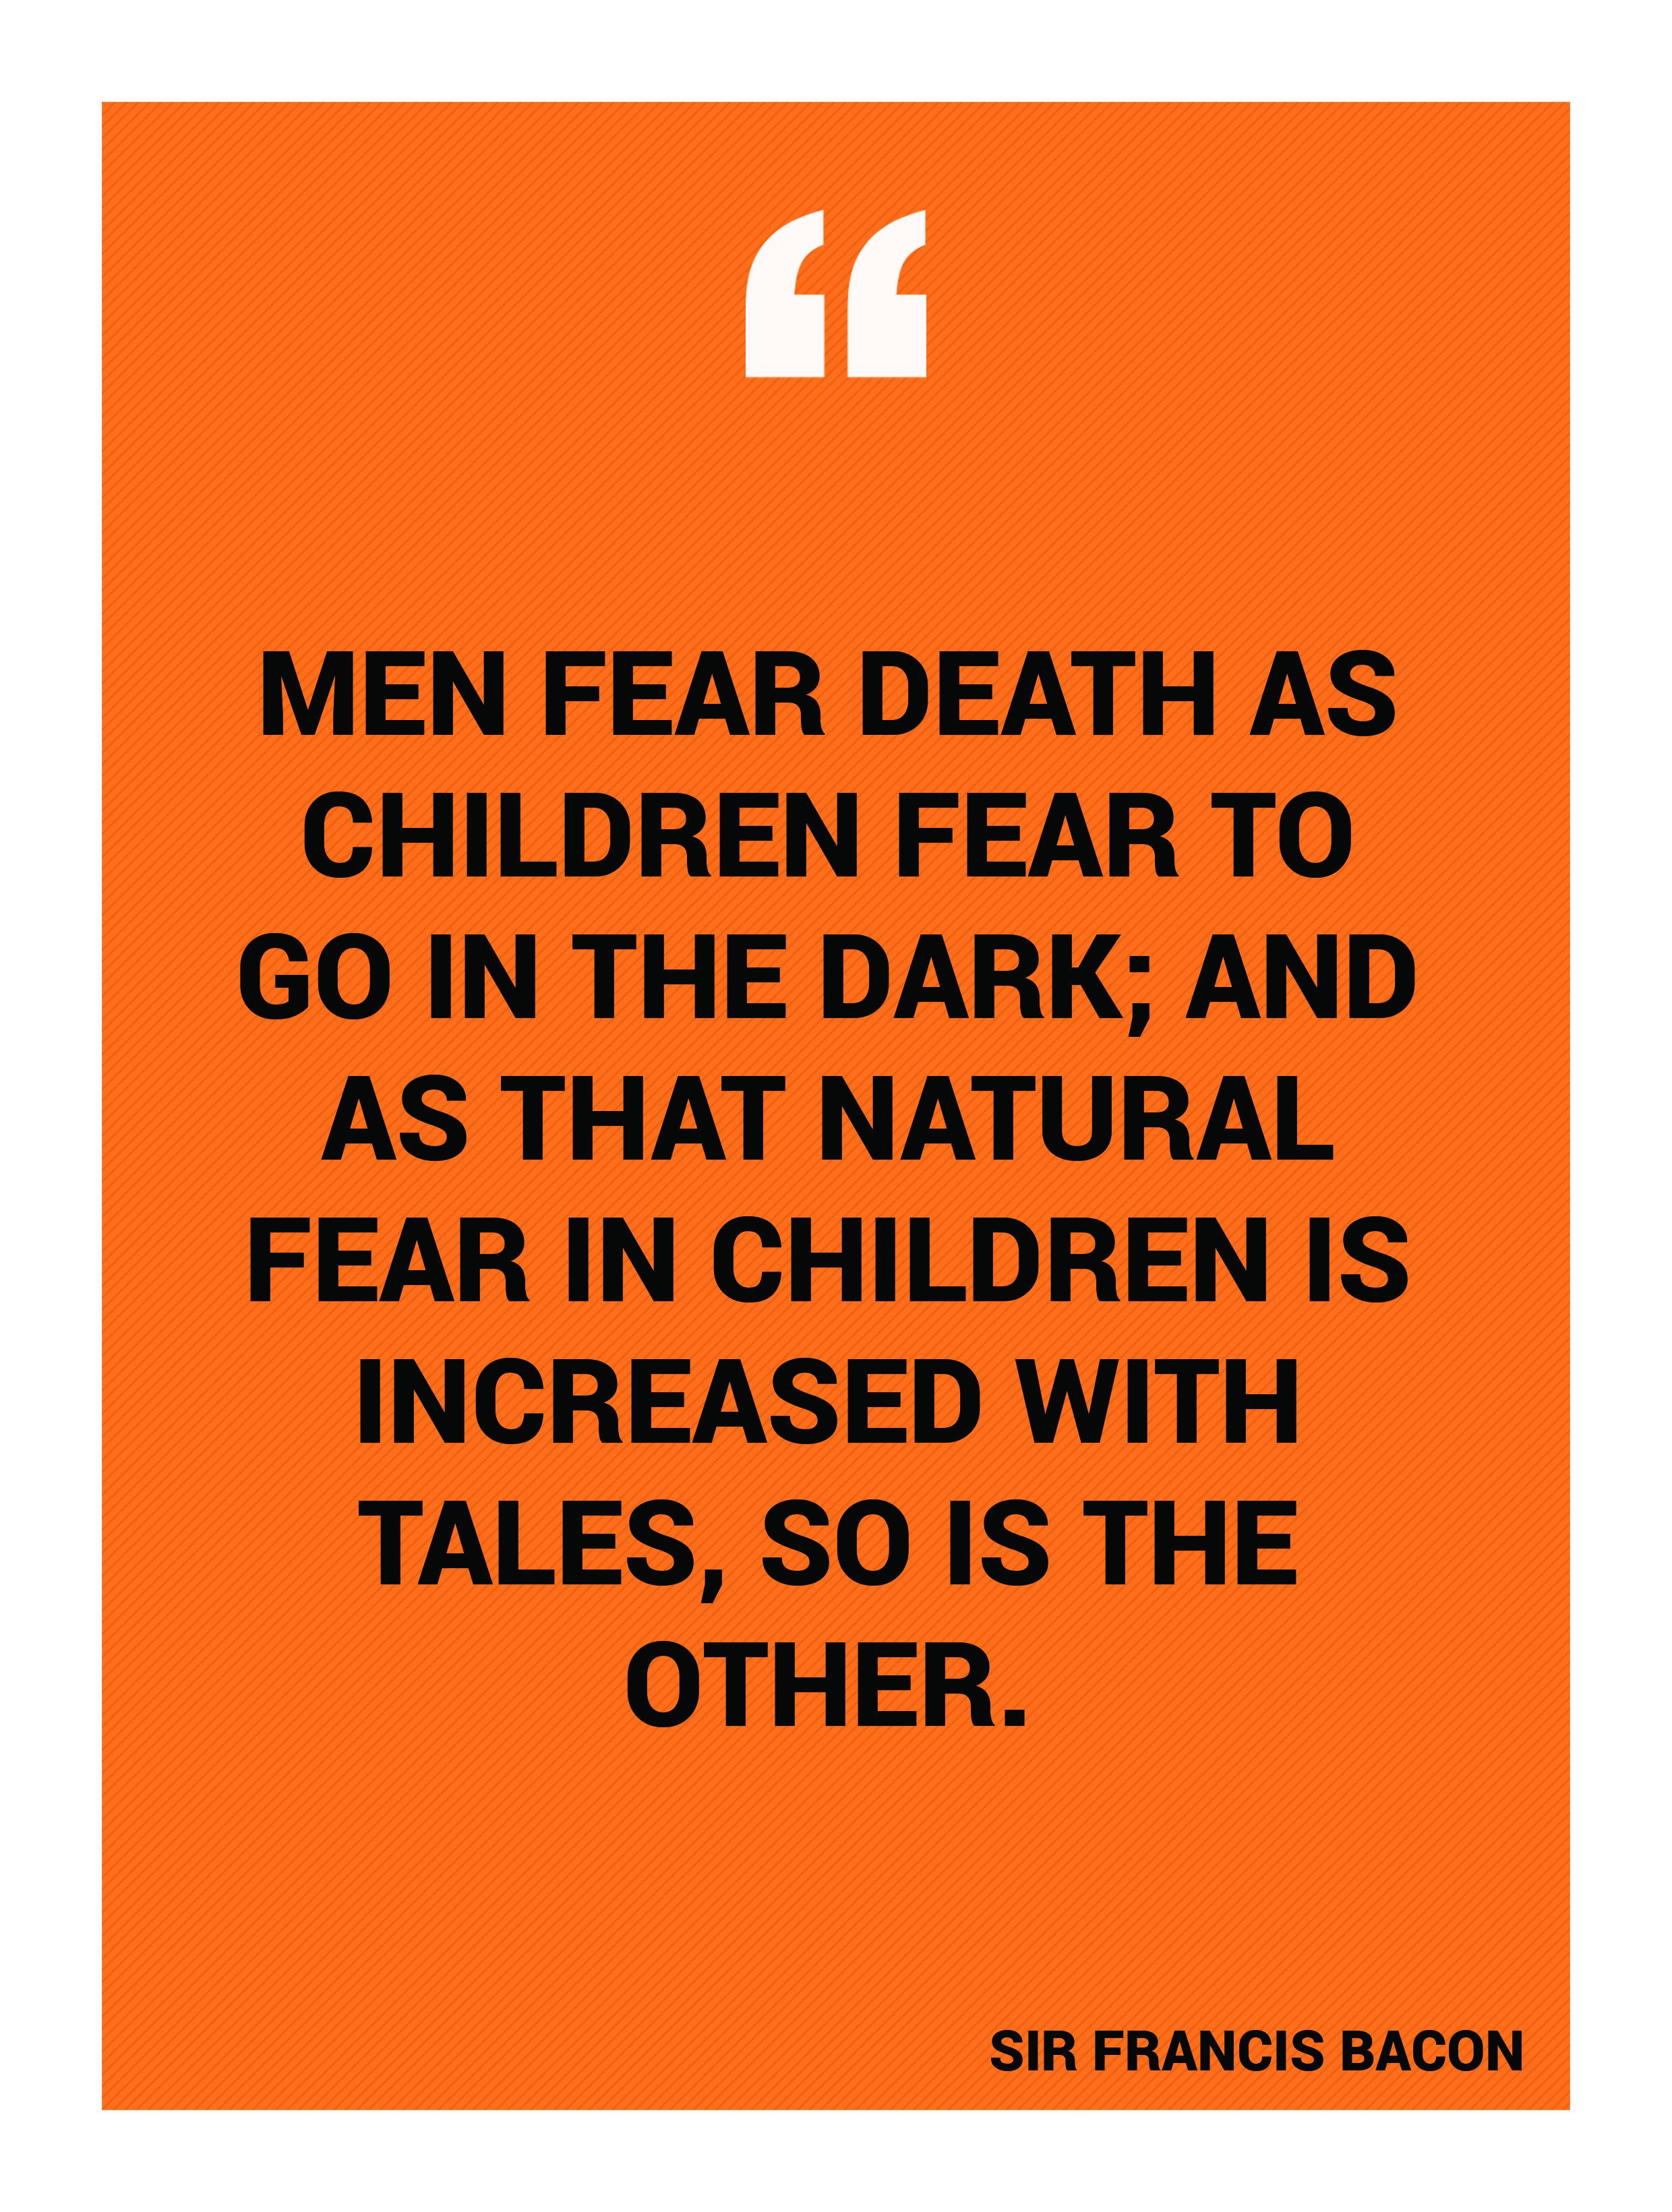 “Men fear death as children fear to go in the dark; and as that natural fear in children is increased with tales, so is the other.” -Sir Francis Bacon